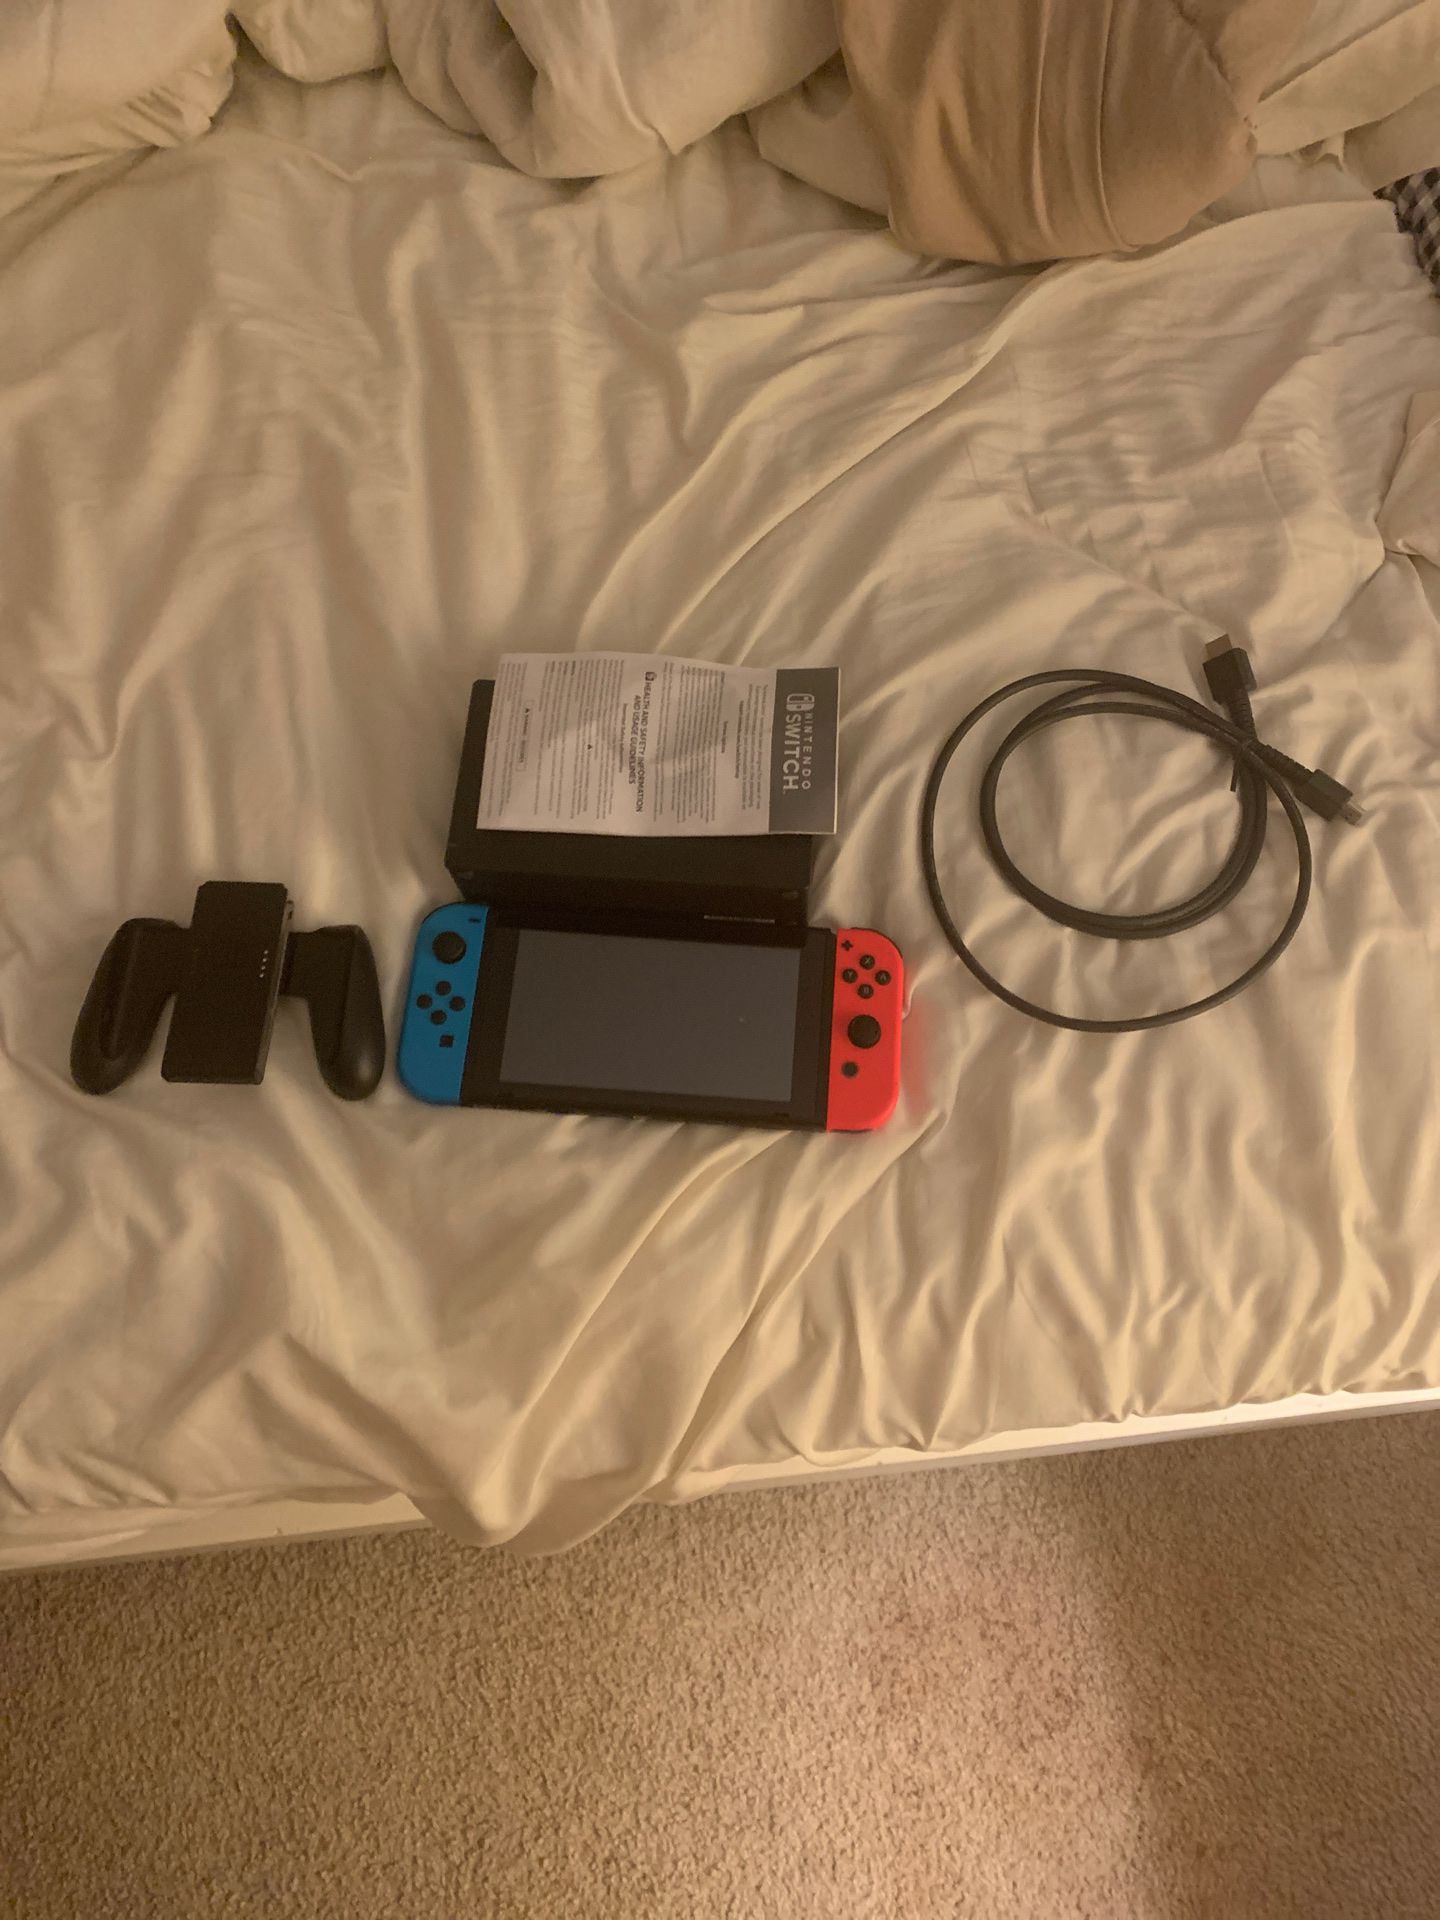 Nintendo switch, no power cable. Can get one at gas station. USB C